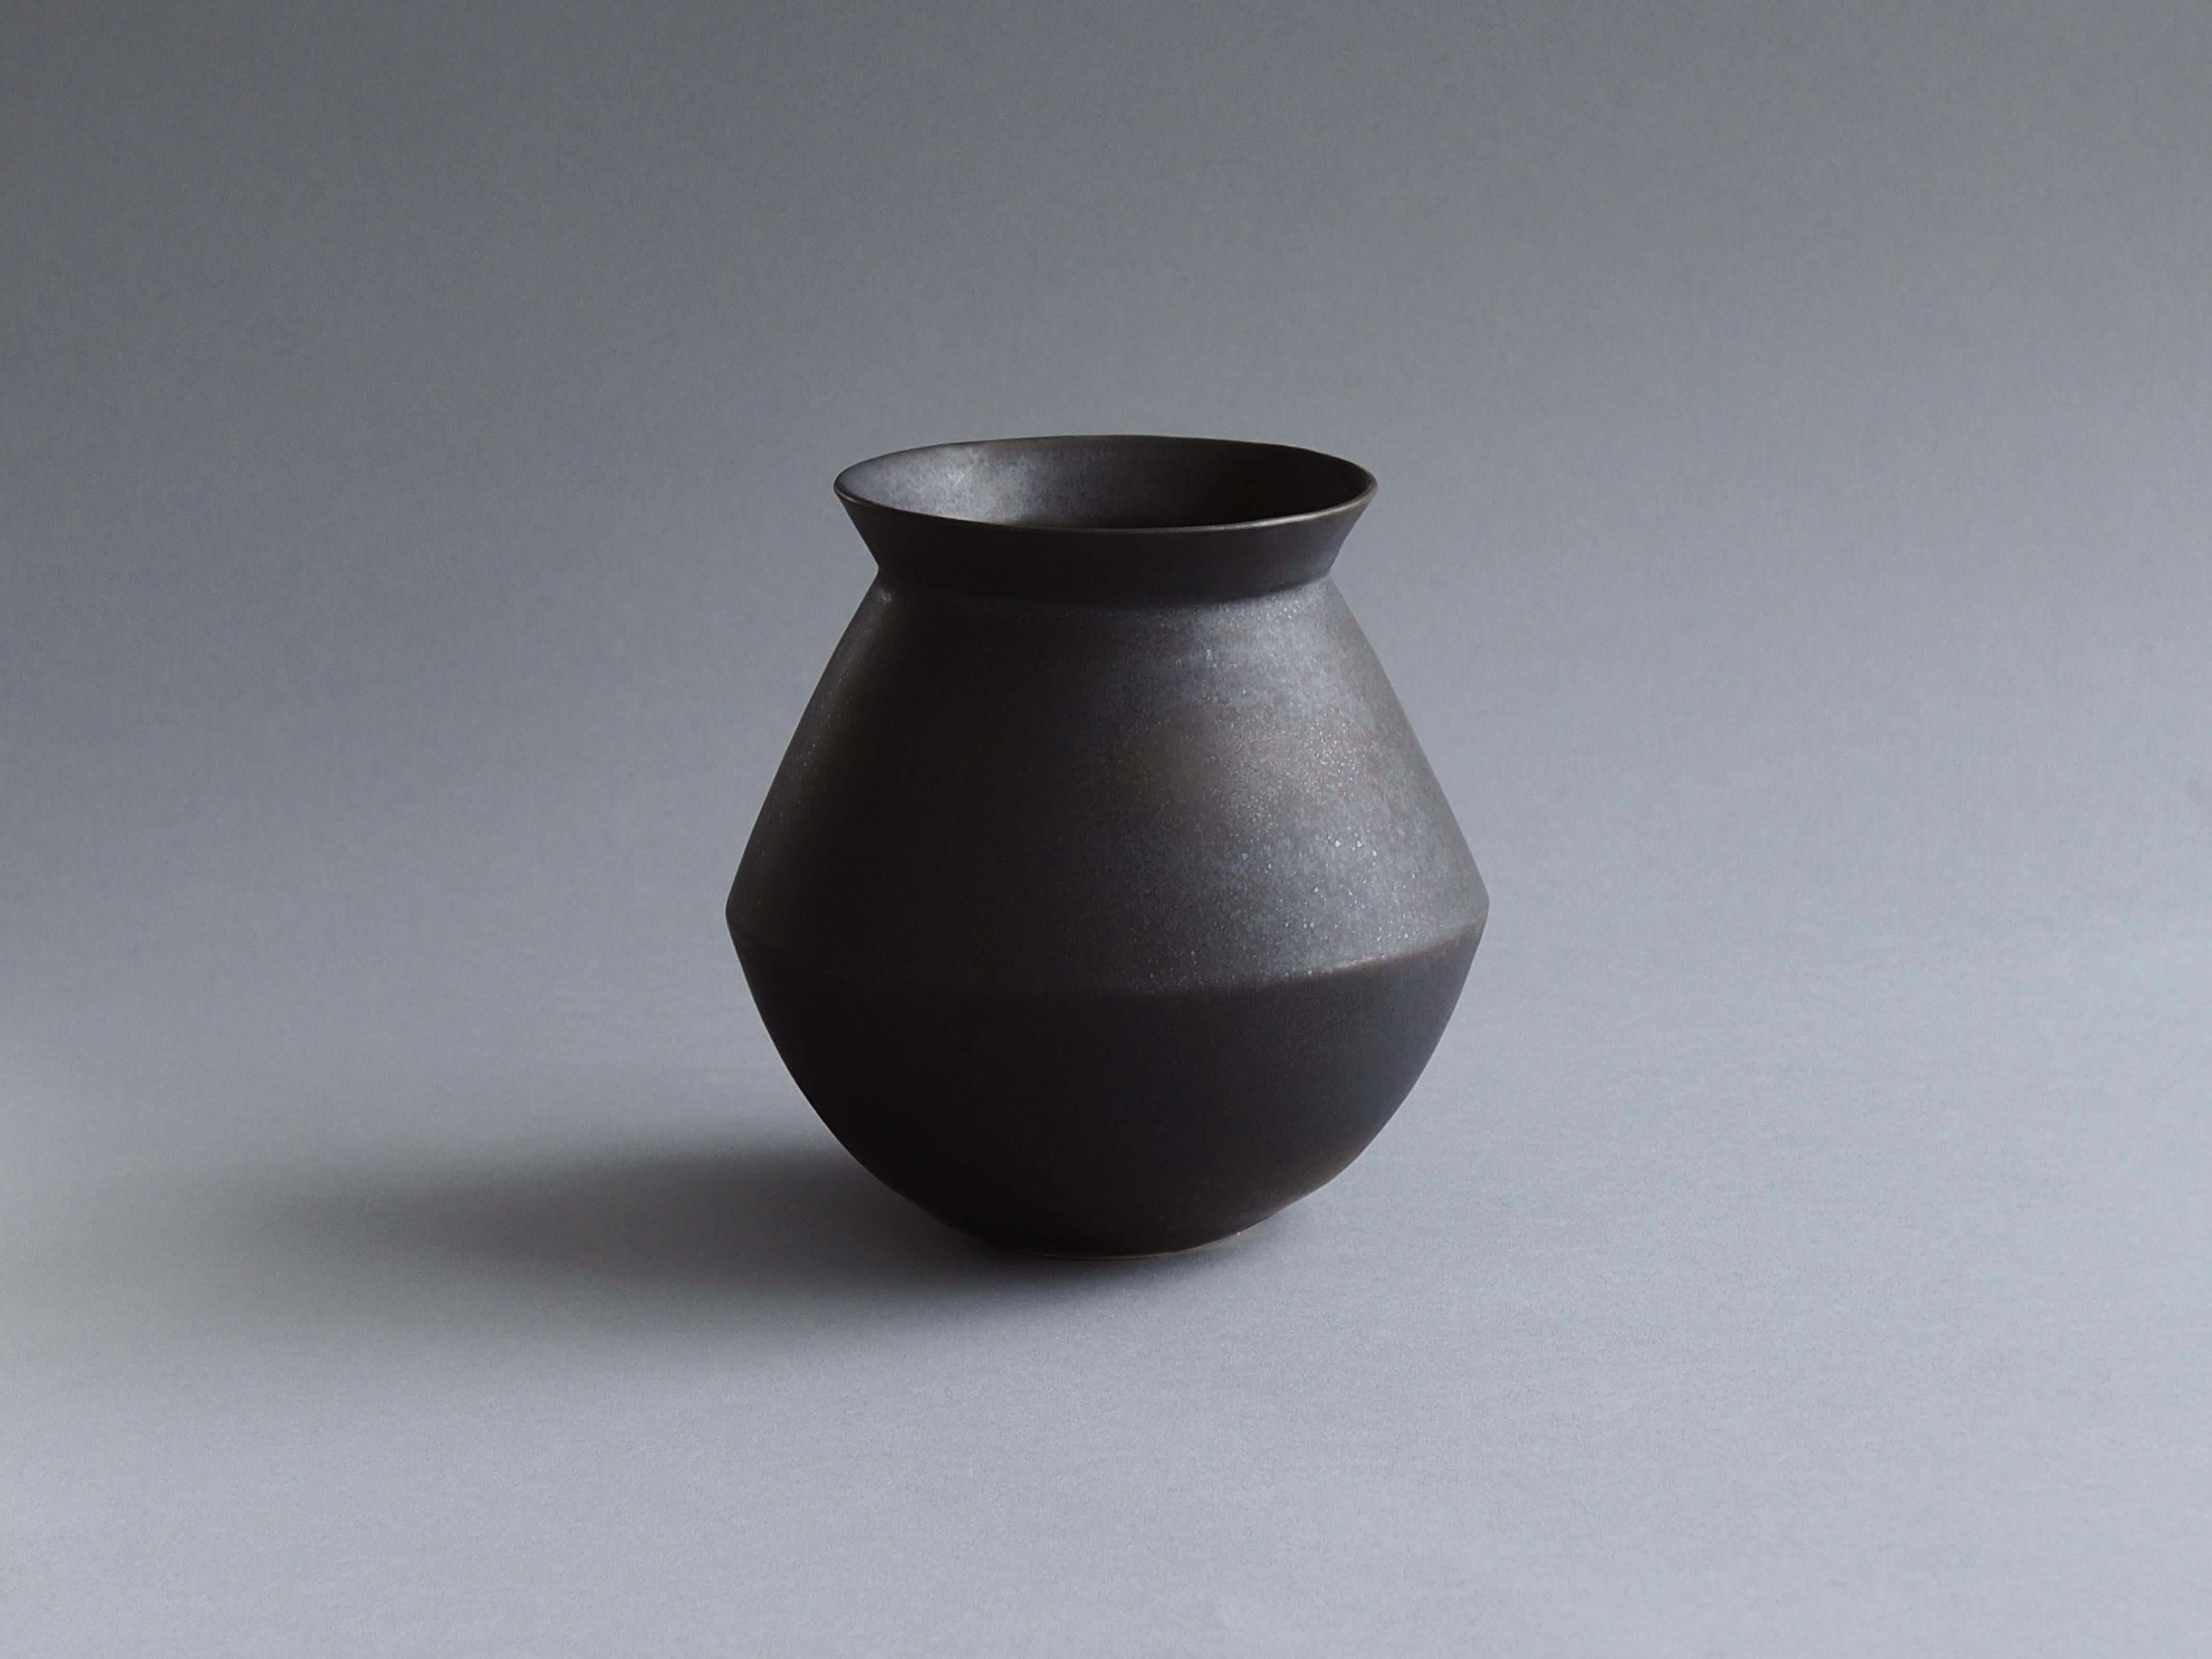 Glazed ceramic vessel by Tracie Hervy. Thrown on the potter’s wheel and fired with a slightly metallic bronze glaze, this one-of-a-kind piece is part of a new body of work created in 2023, inspired by iconic forms in ceramic history.

Tracie Hervy